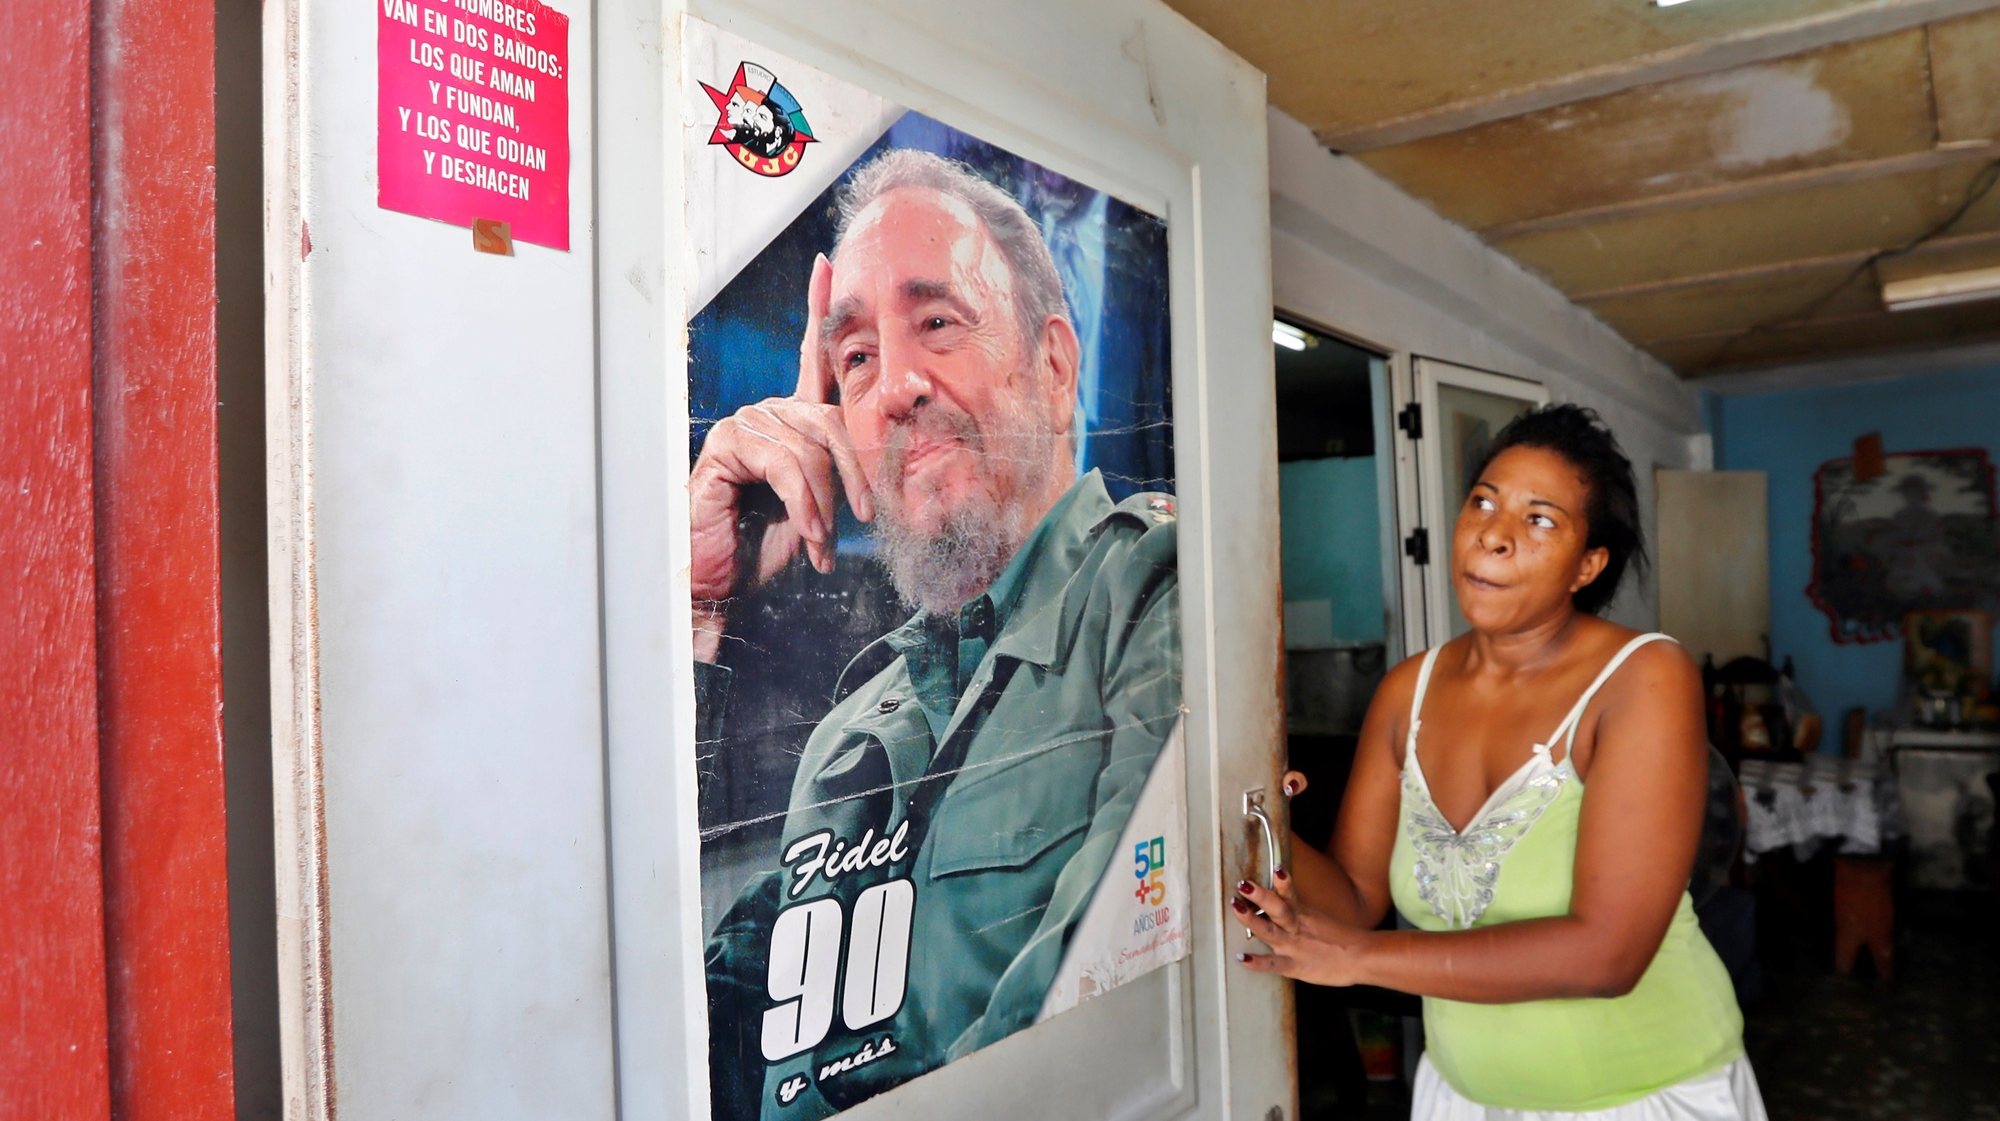 epa09494502 A woman observes a poster with the image of the historical leader of the Cuban revolution Fidel Castro at the door of her house, in Havana, Cuba, 28 September 2021. The Cuban Government commemorates on 28 September the 61st anniversary of the largest mass organization in the country. The CDR (Committees for the Defense of the Revolution) were born in 1960 with the objective of maintaining control and collective surveillance of everything that could destabilize the Cuban political system after the revolution.  EPA/Ernesto Mastrascusa